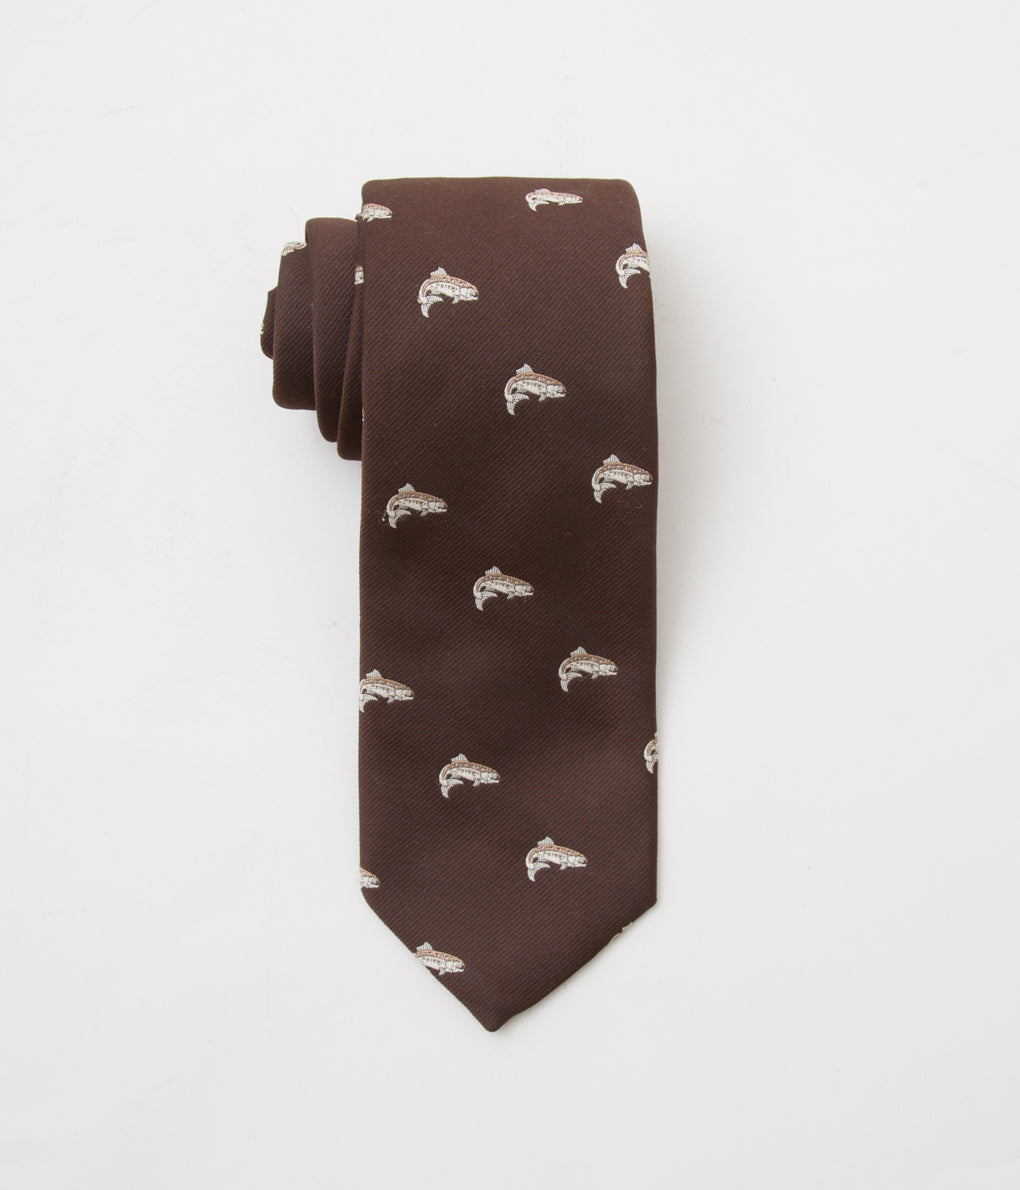 FROM USA "O'CONNELL LUCAS-CHELF EMBROIDERED TIE BROWN FISH"(BROWN)